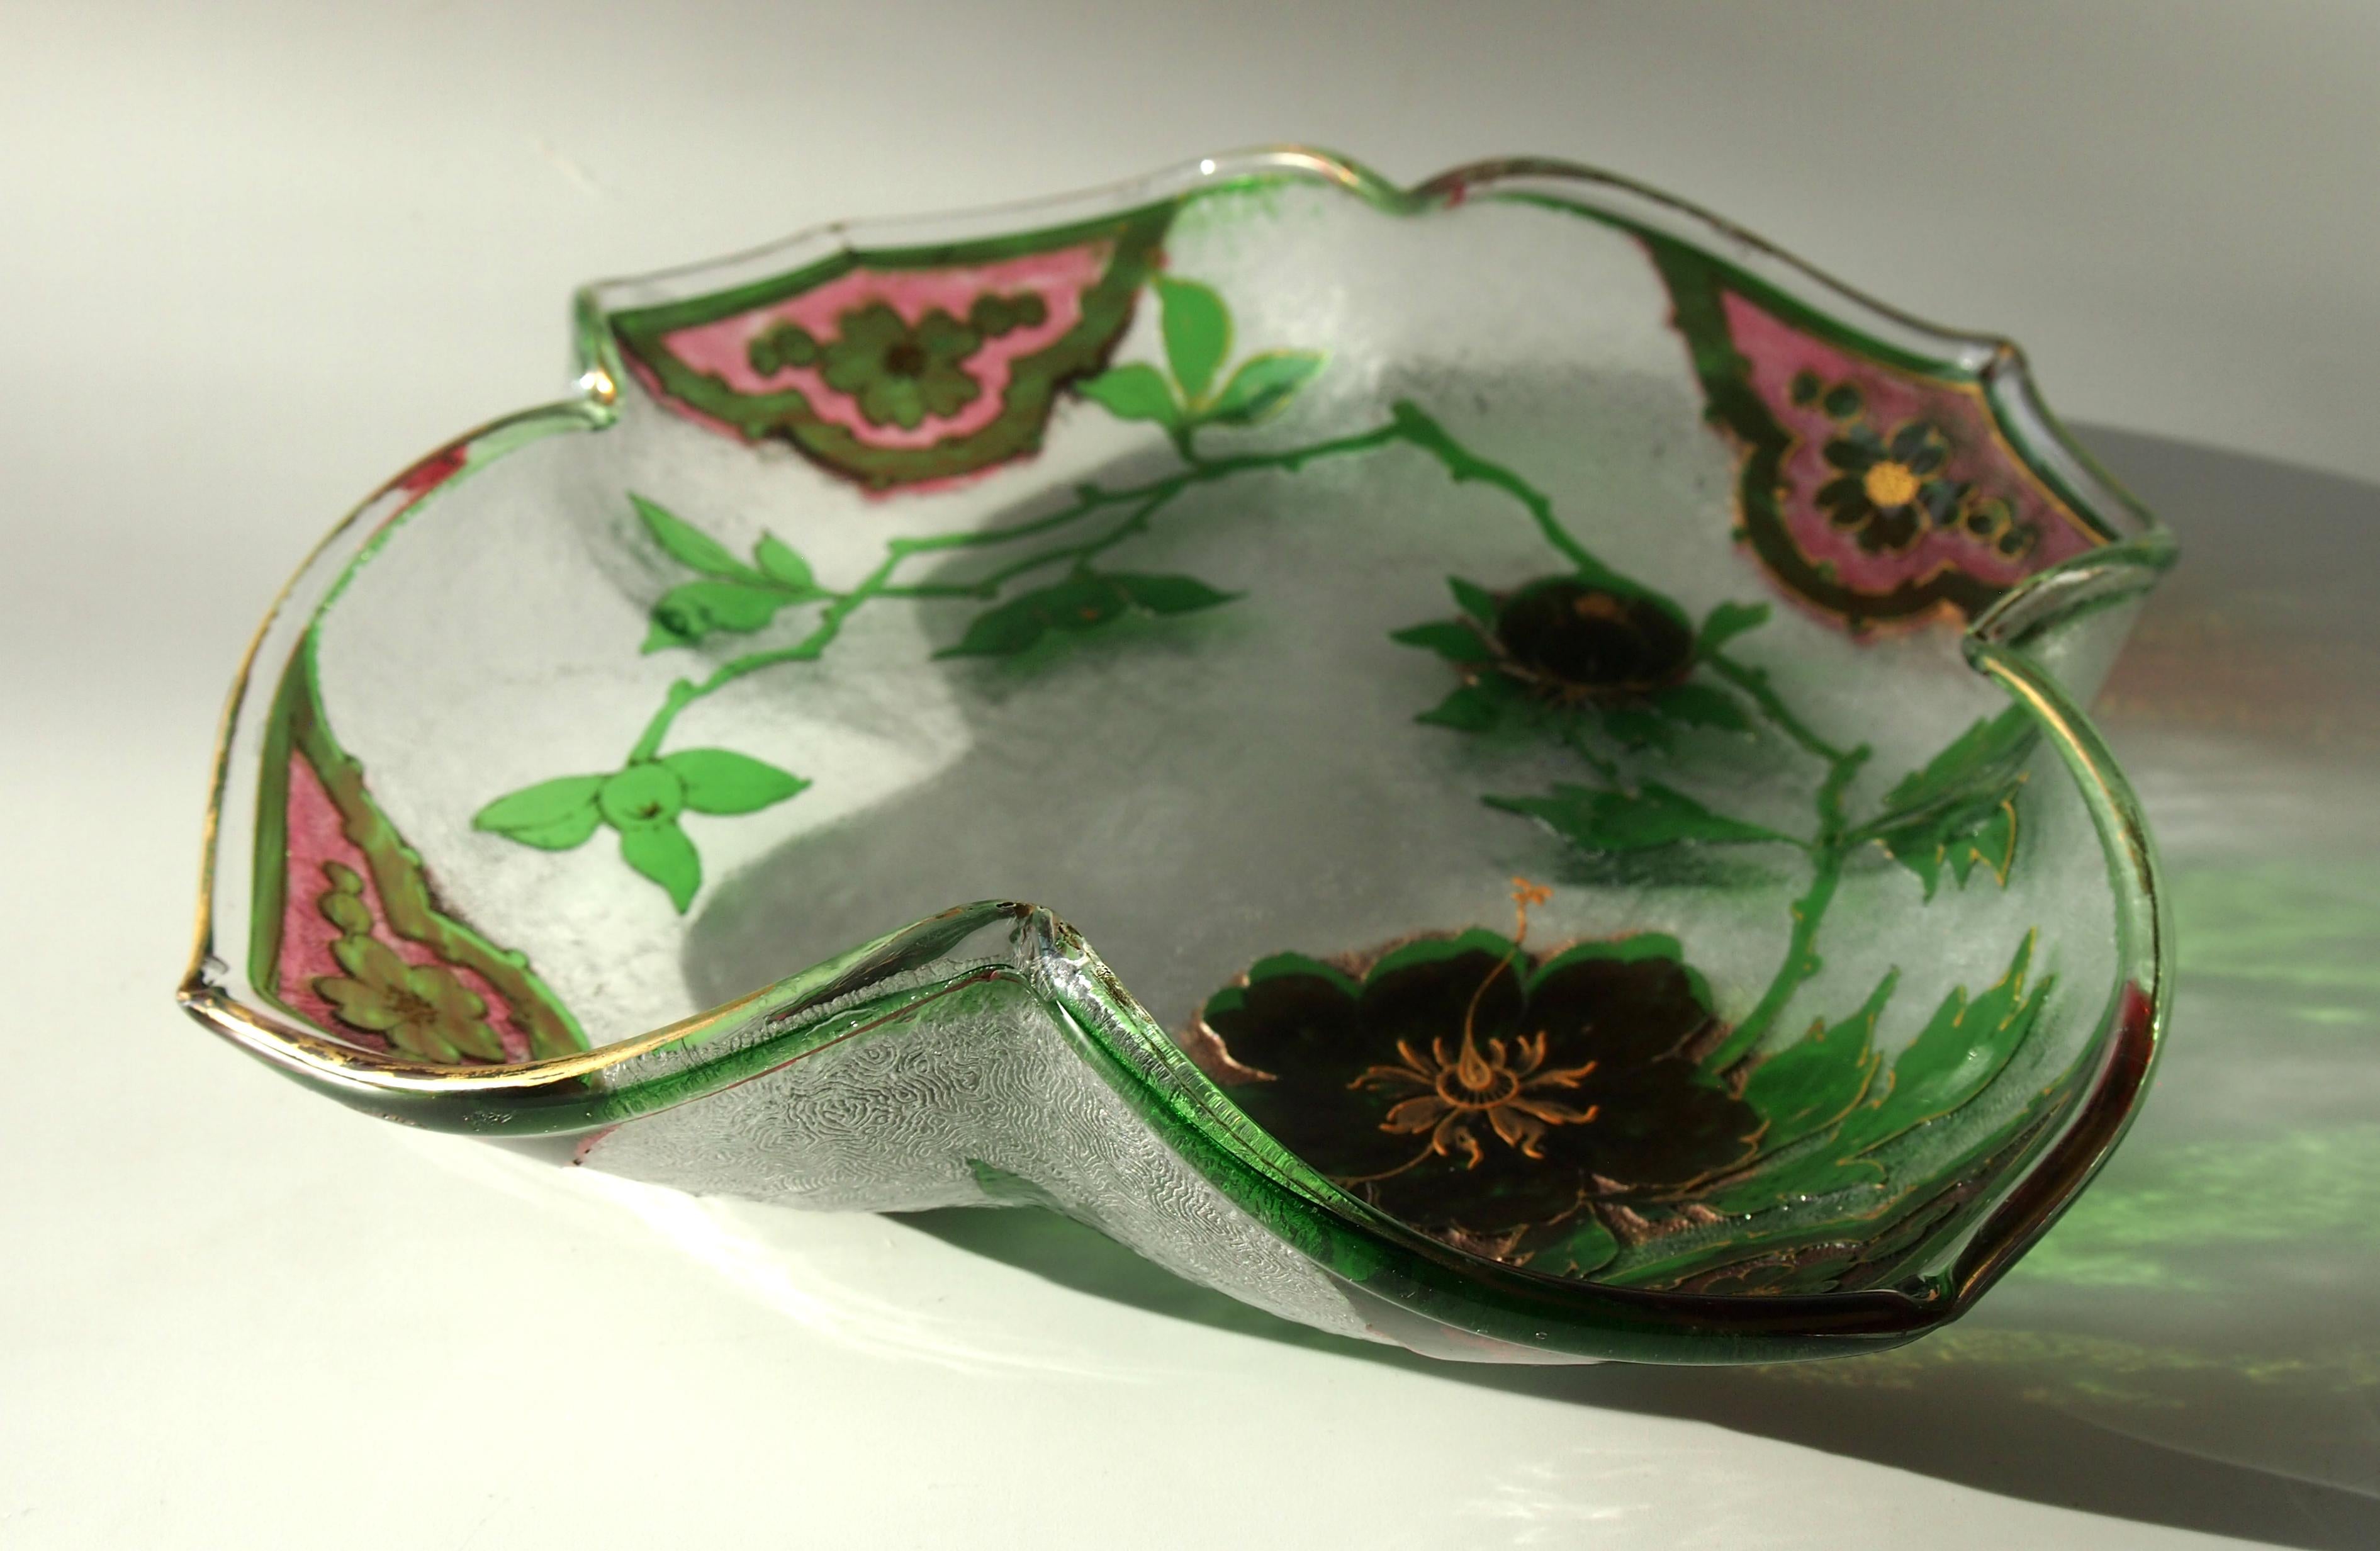 Bohemian Art Nouveau Pink and Green Cameo Glass Dish by Riedel, circa 1900 (Tschechisch) im Angebot